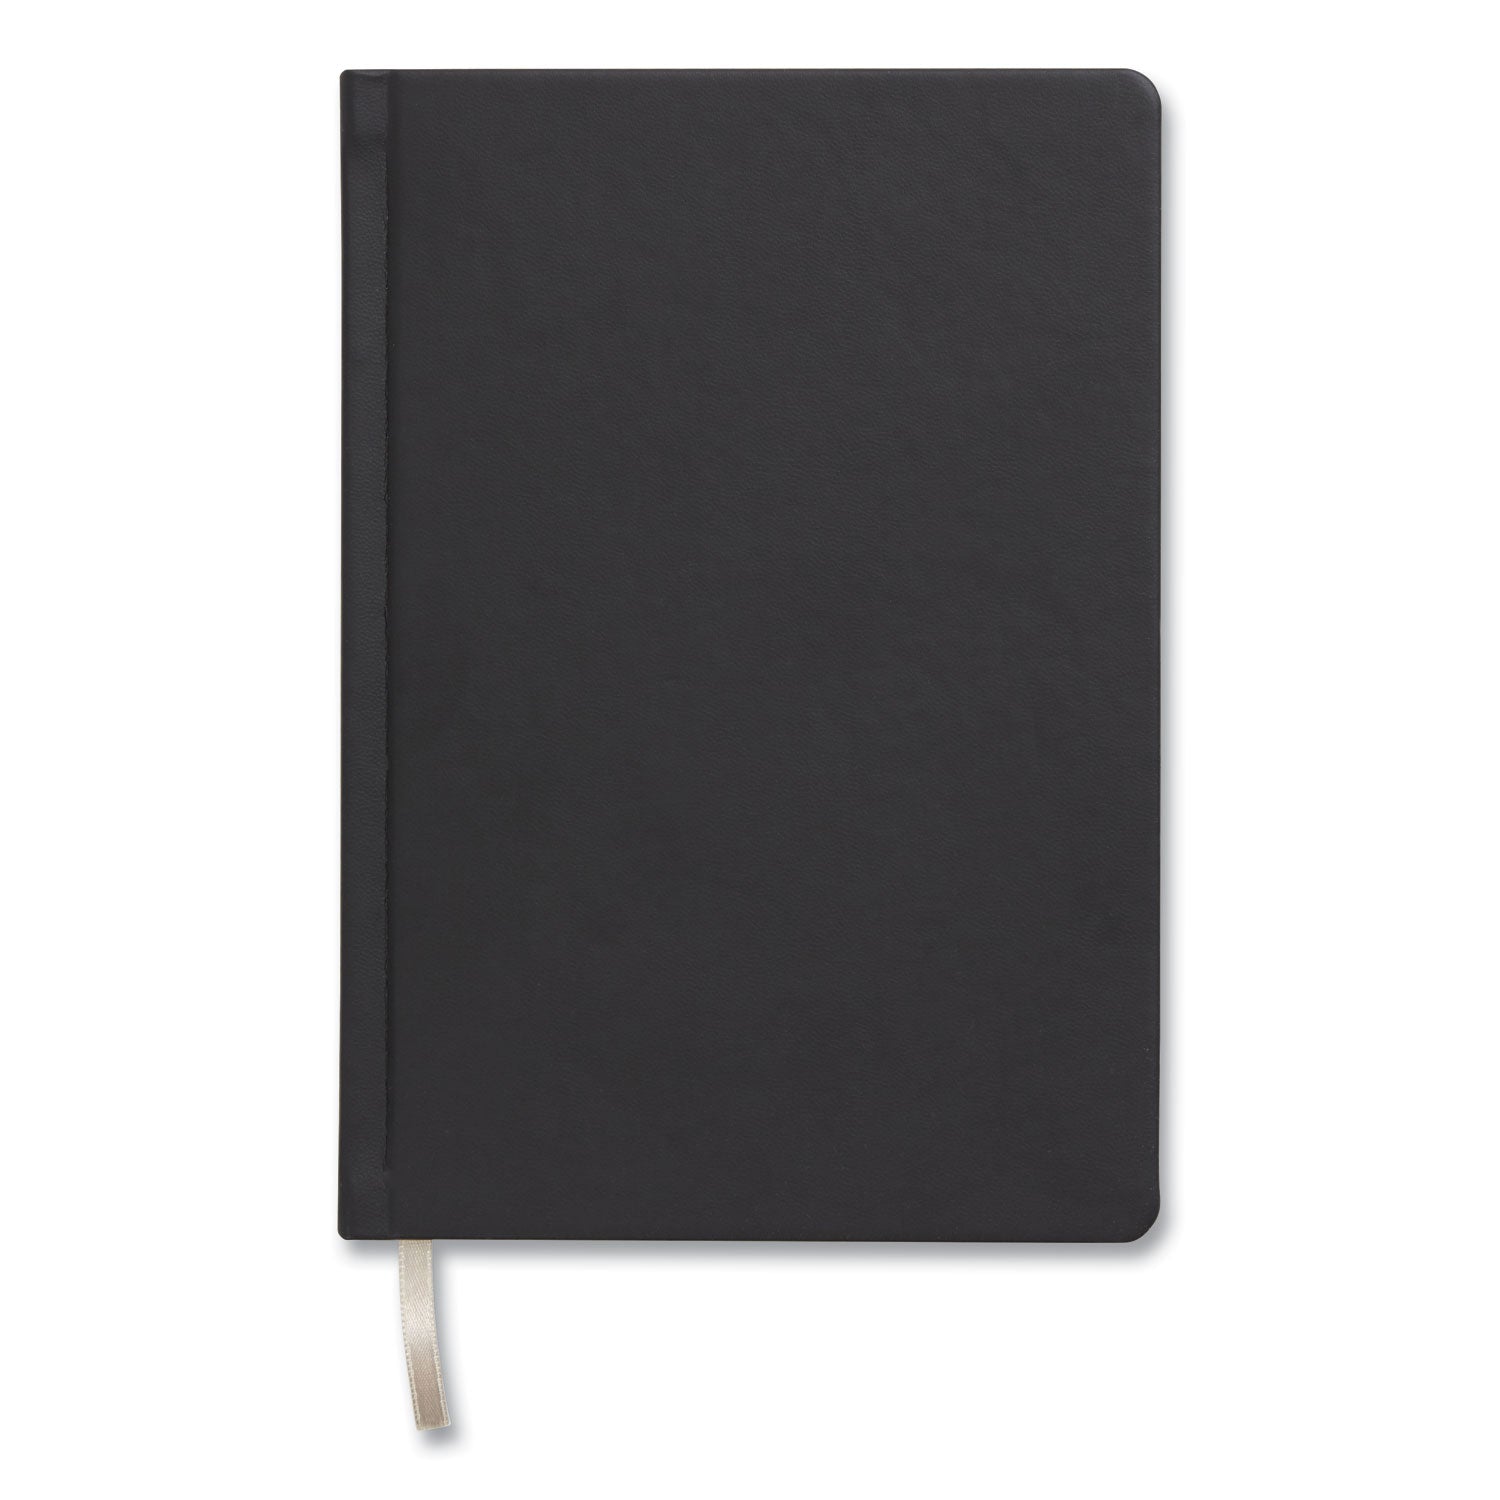 hardcover-business-journal-1-subject-narrow-rule-black-cover-96-8-x-55-sheets_tud24377290 - 1